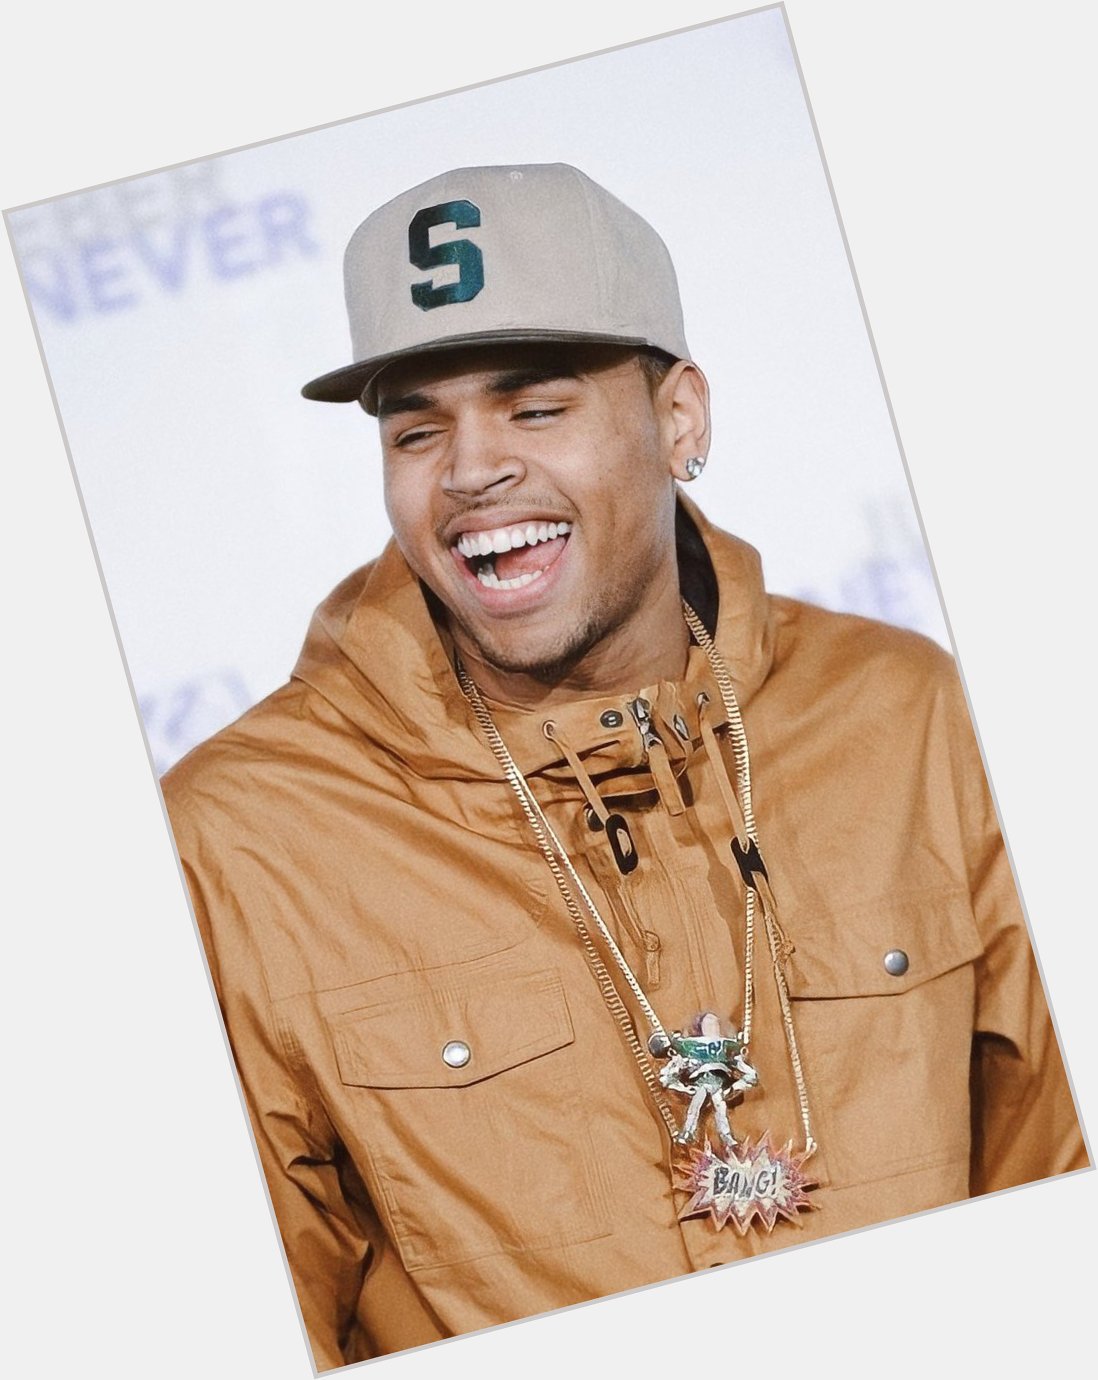 HAPPY BIRTHDAY CHRIS BROWN, the king of R&B and the best father 